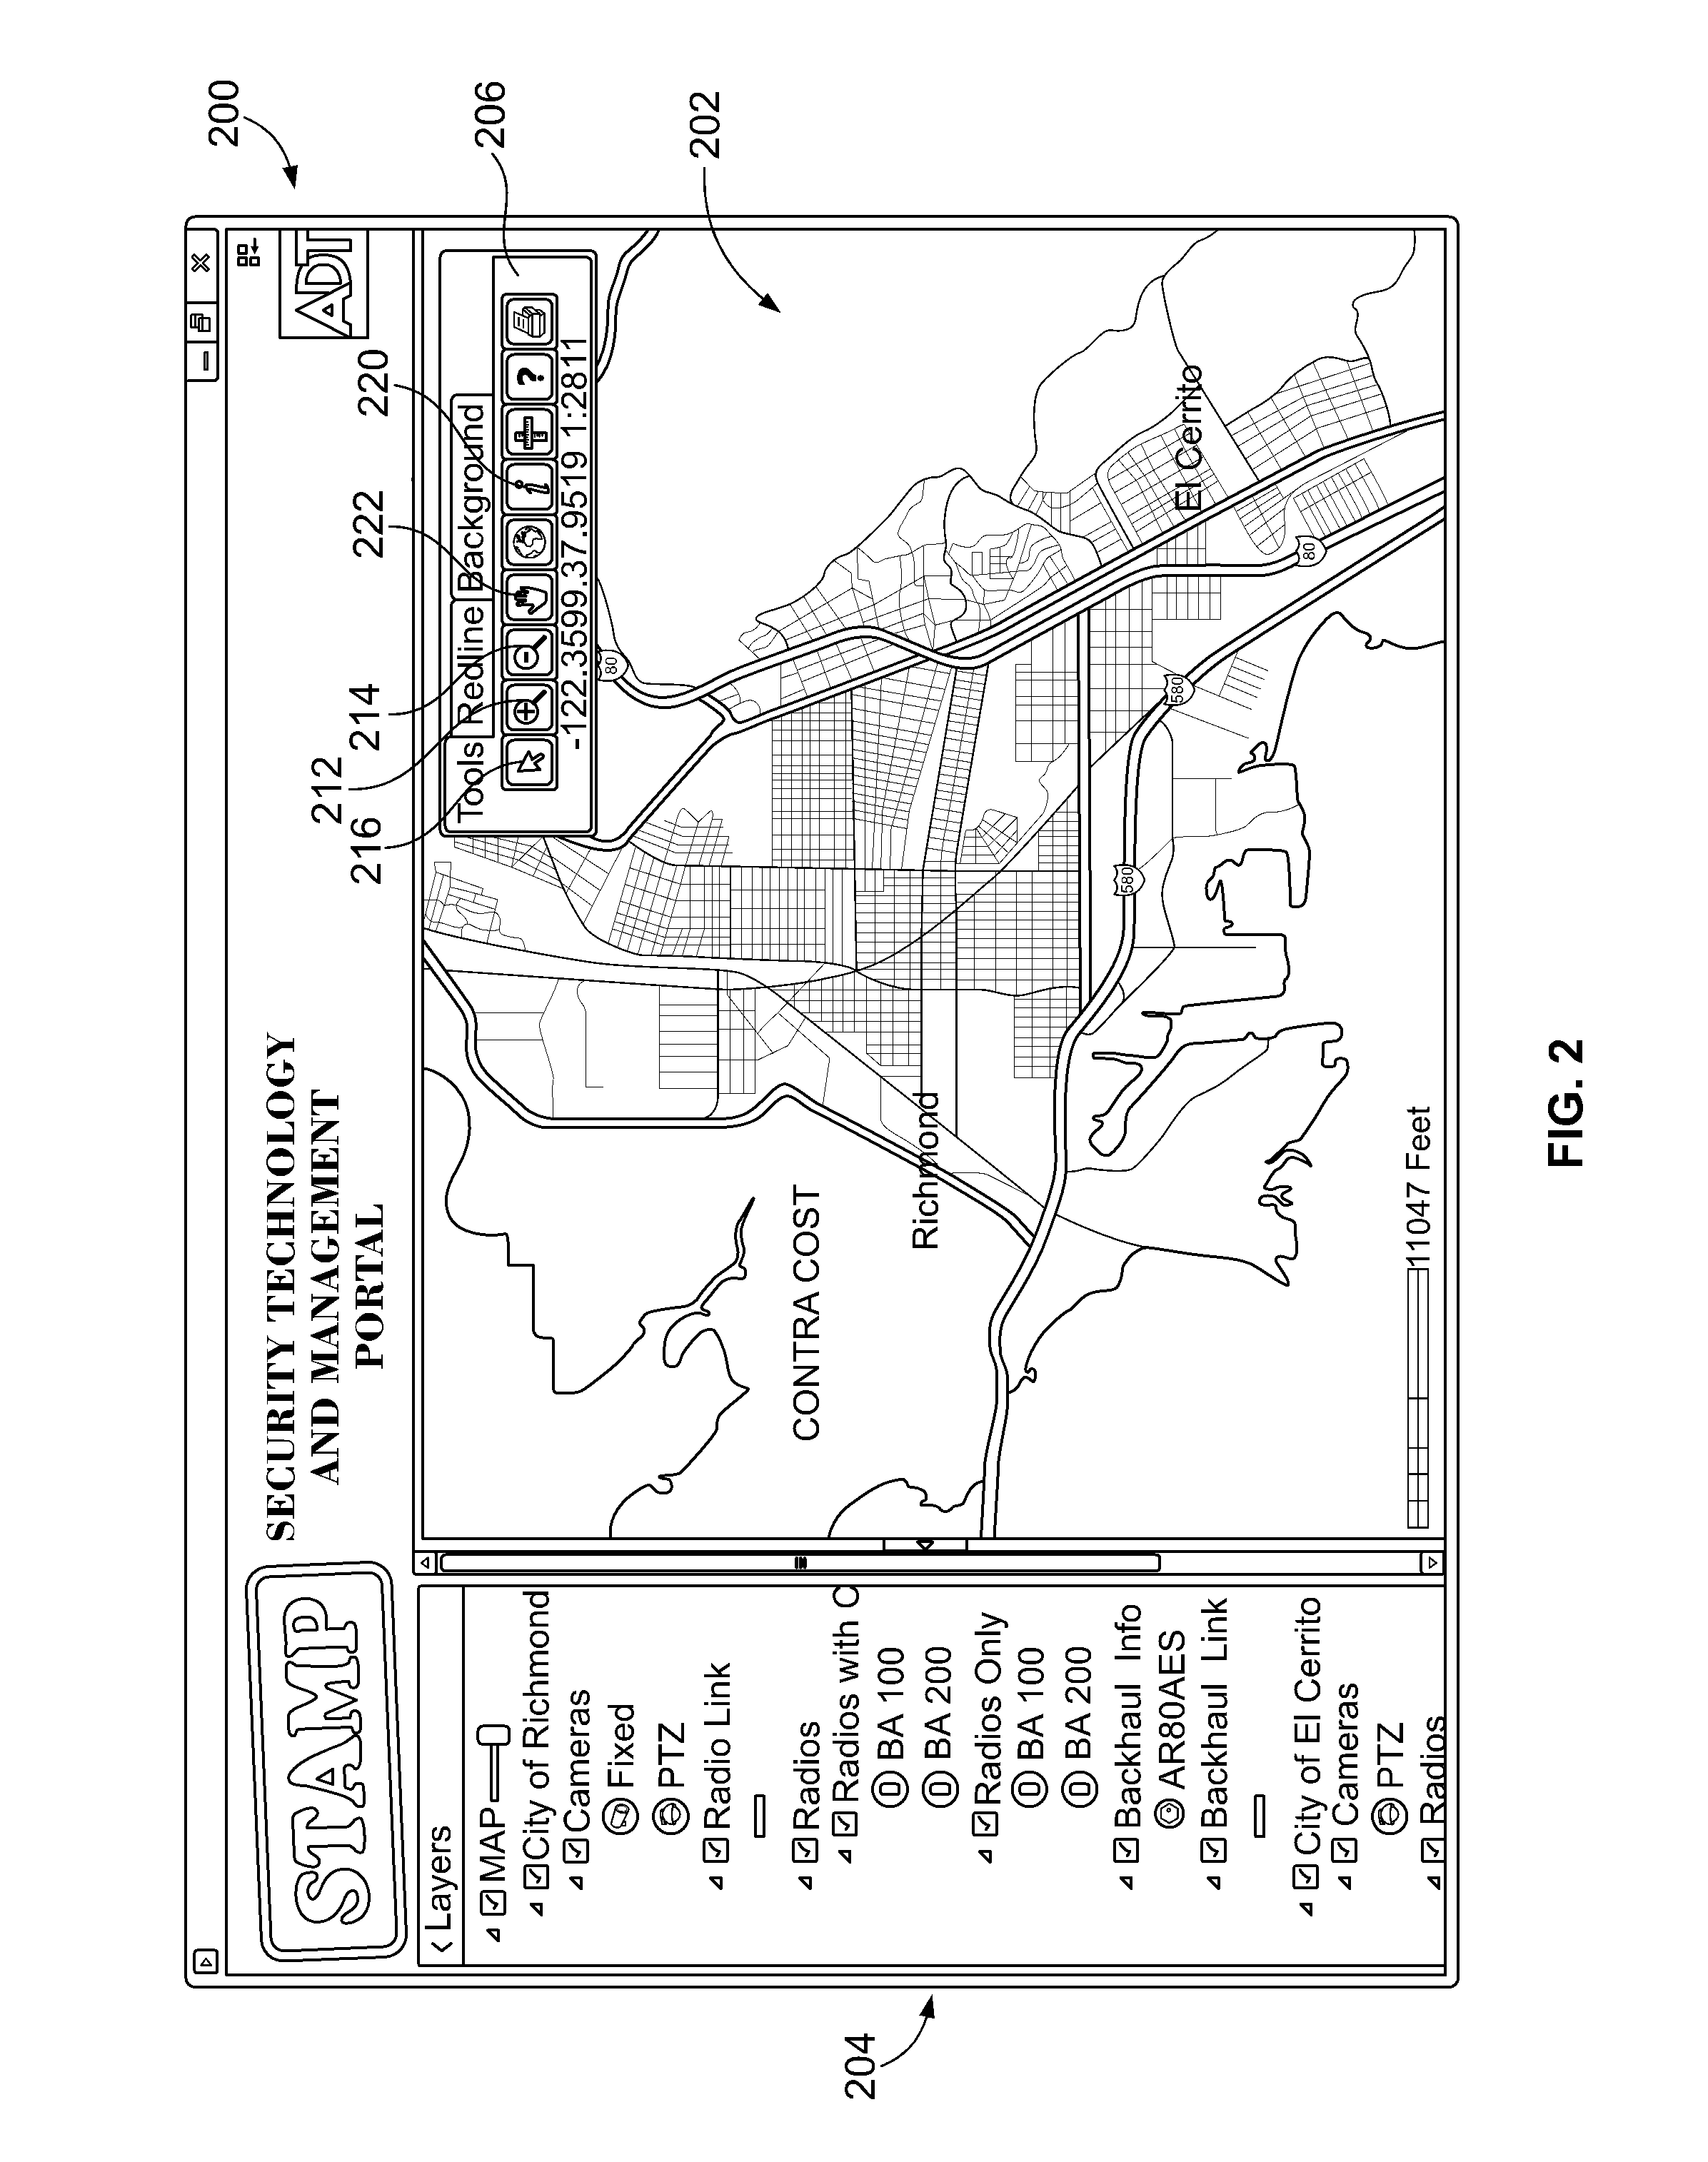 Method and database to provide a security technology and management portal